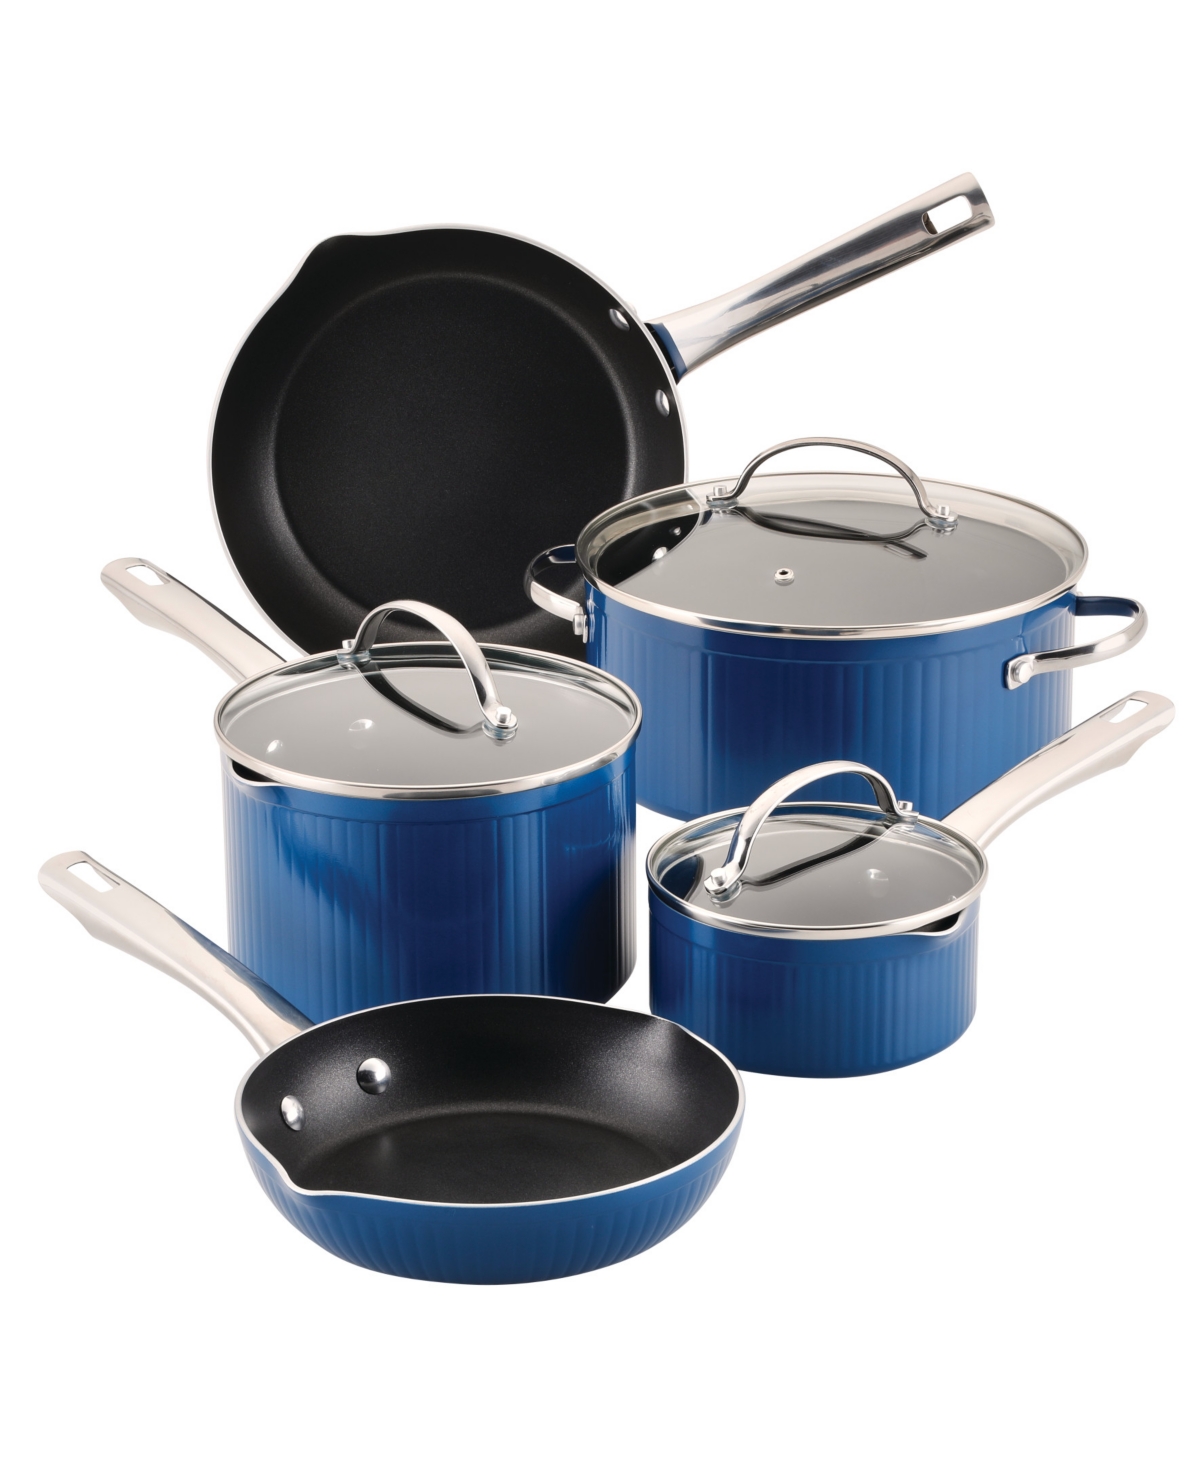 Farberware Style Aluminum Nonstick 10 Piece Cookware Pots And Pans Set In Blue